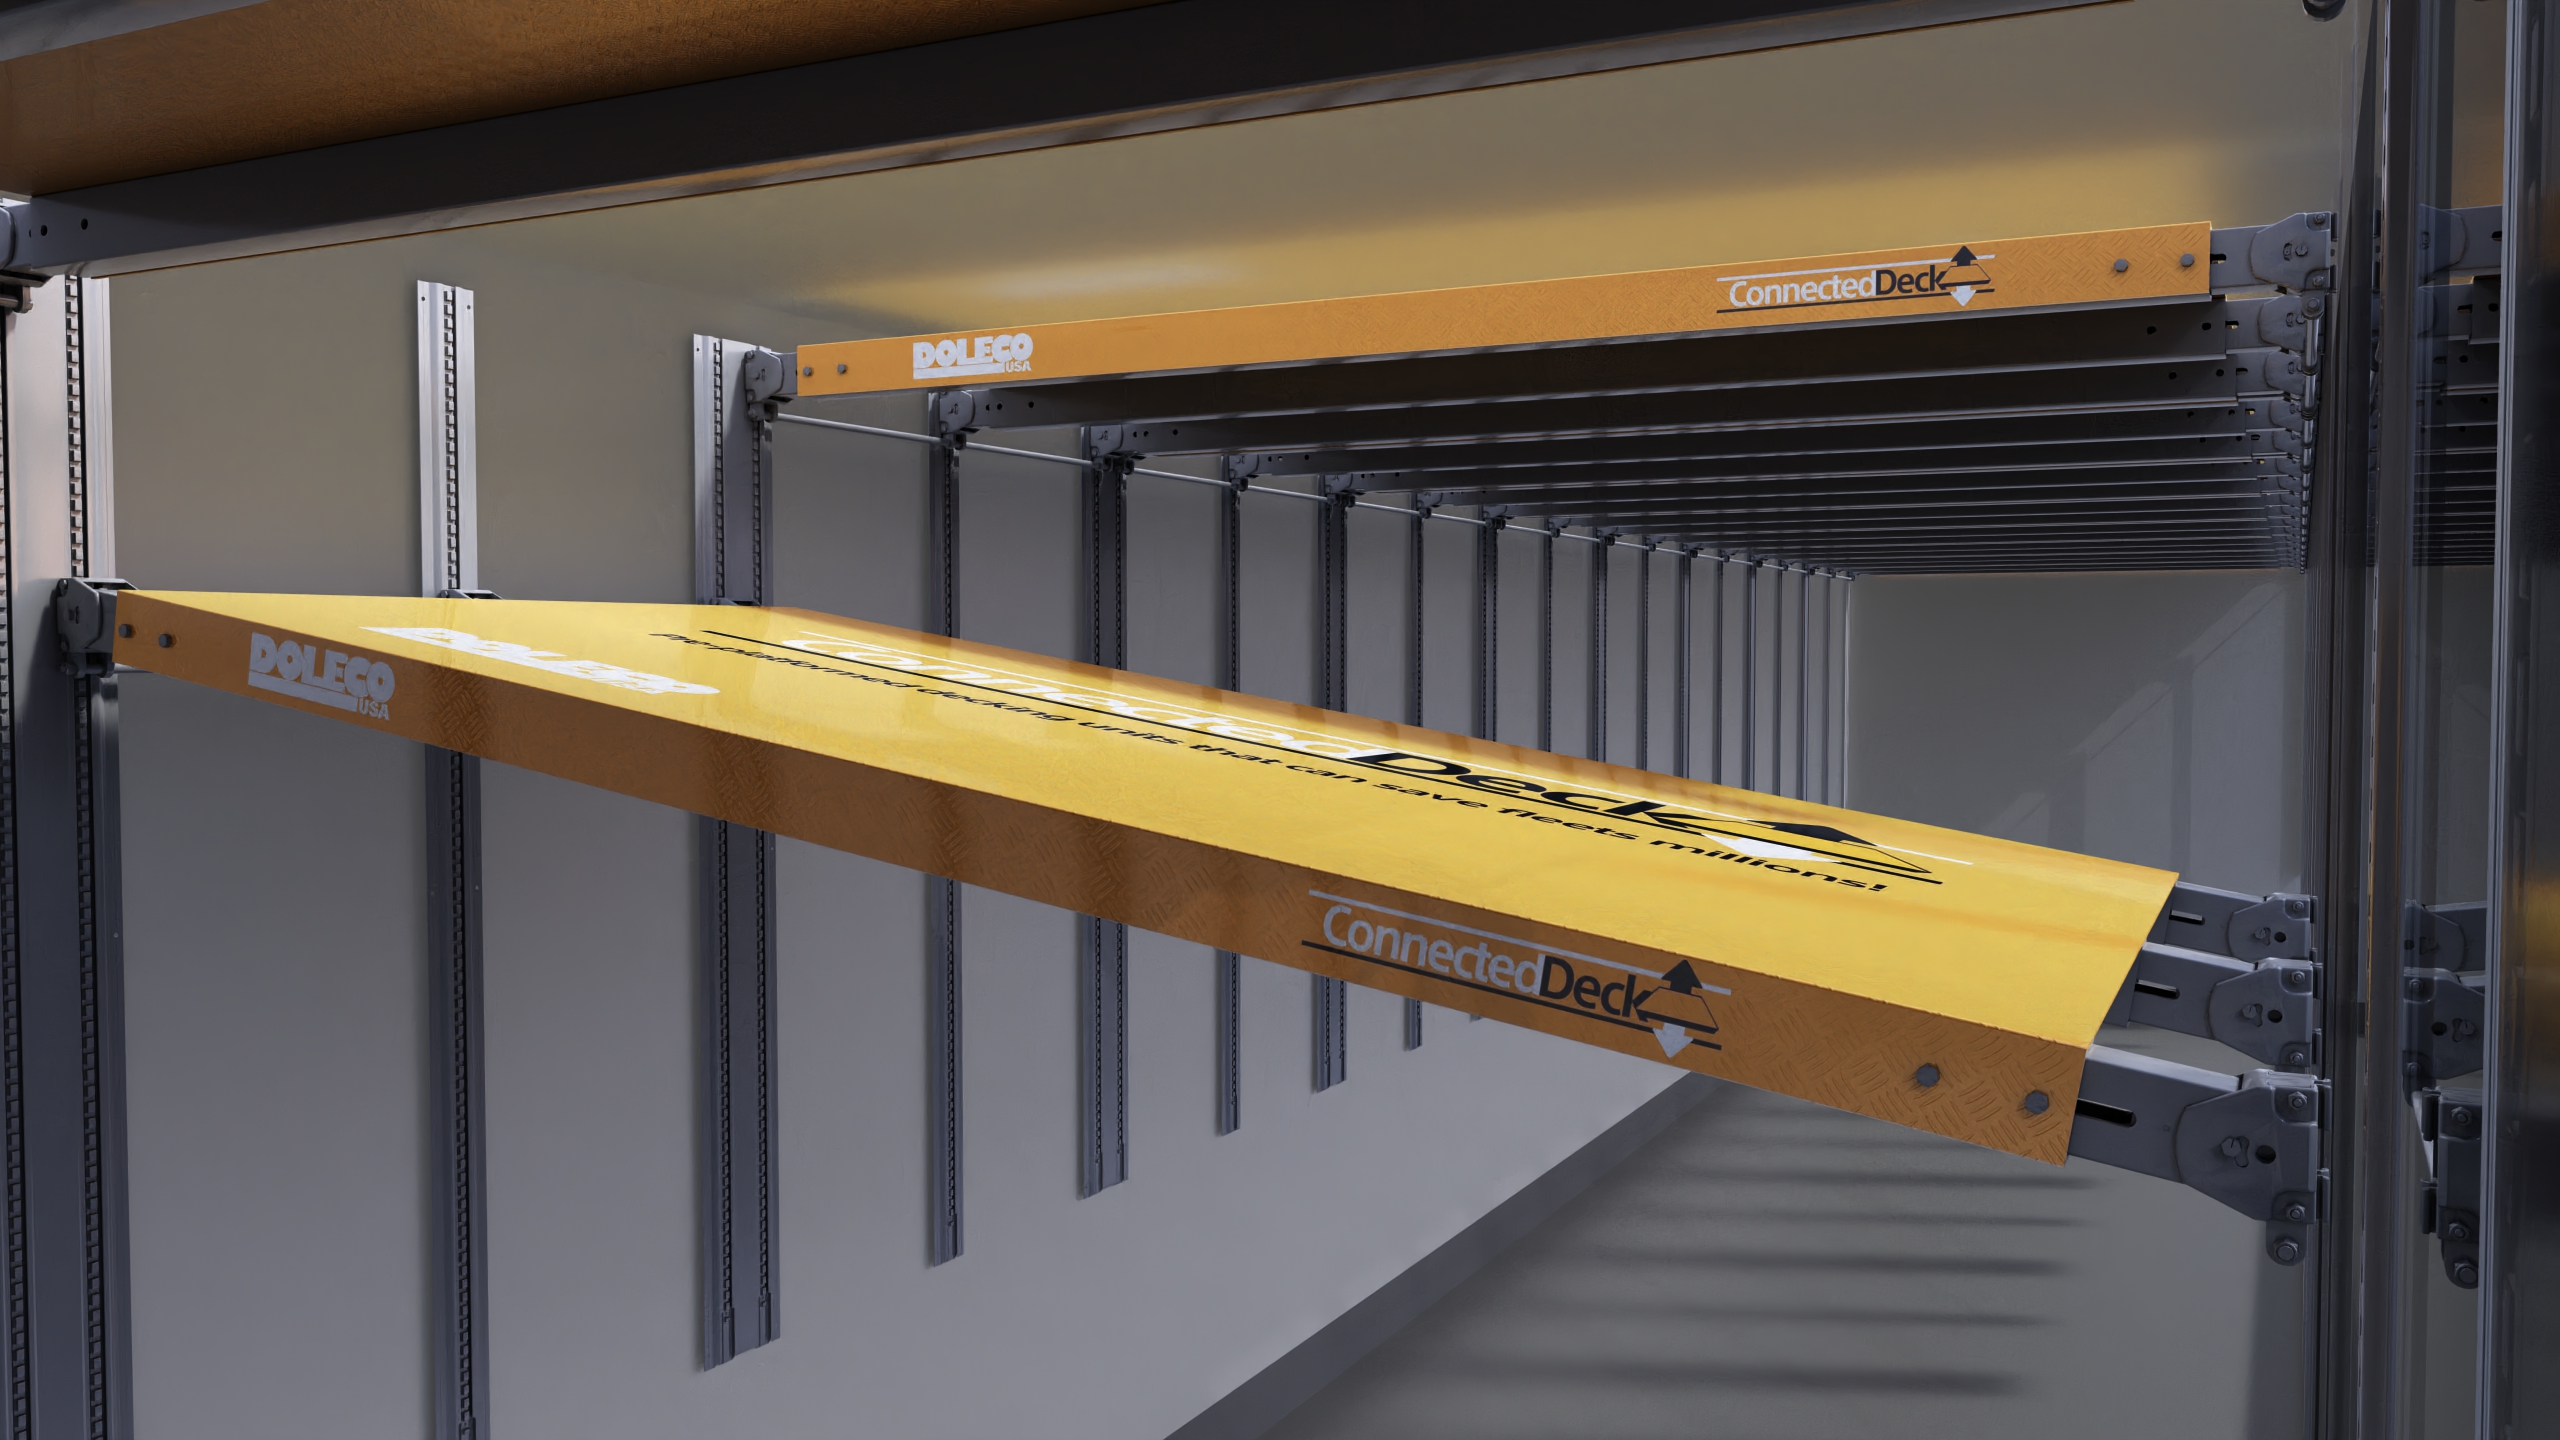 Doleco’s LayerLok XP can be installed with structural-grade adhesives with three times the strength of riveted tracks, without penetrating and compromising trailer walls.